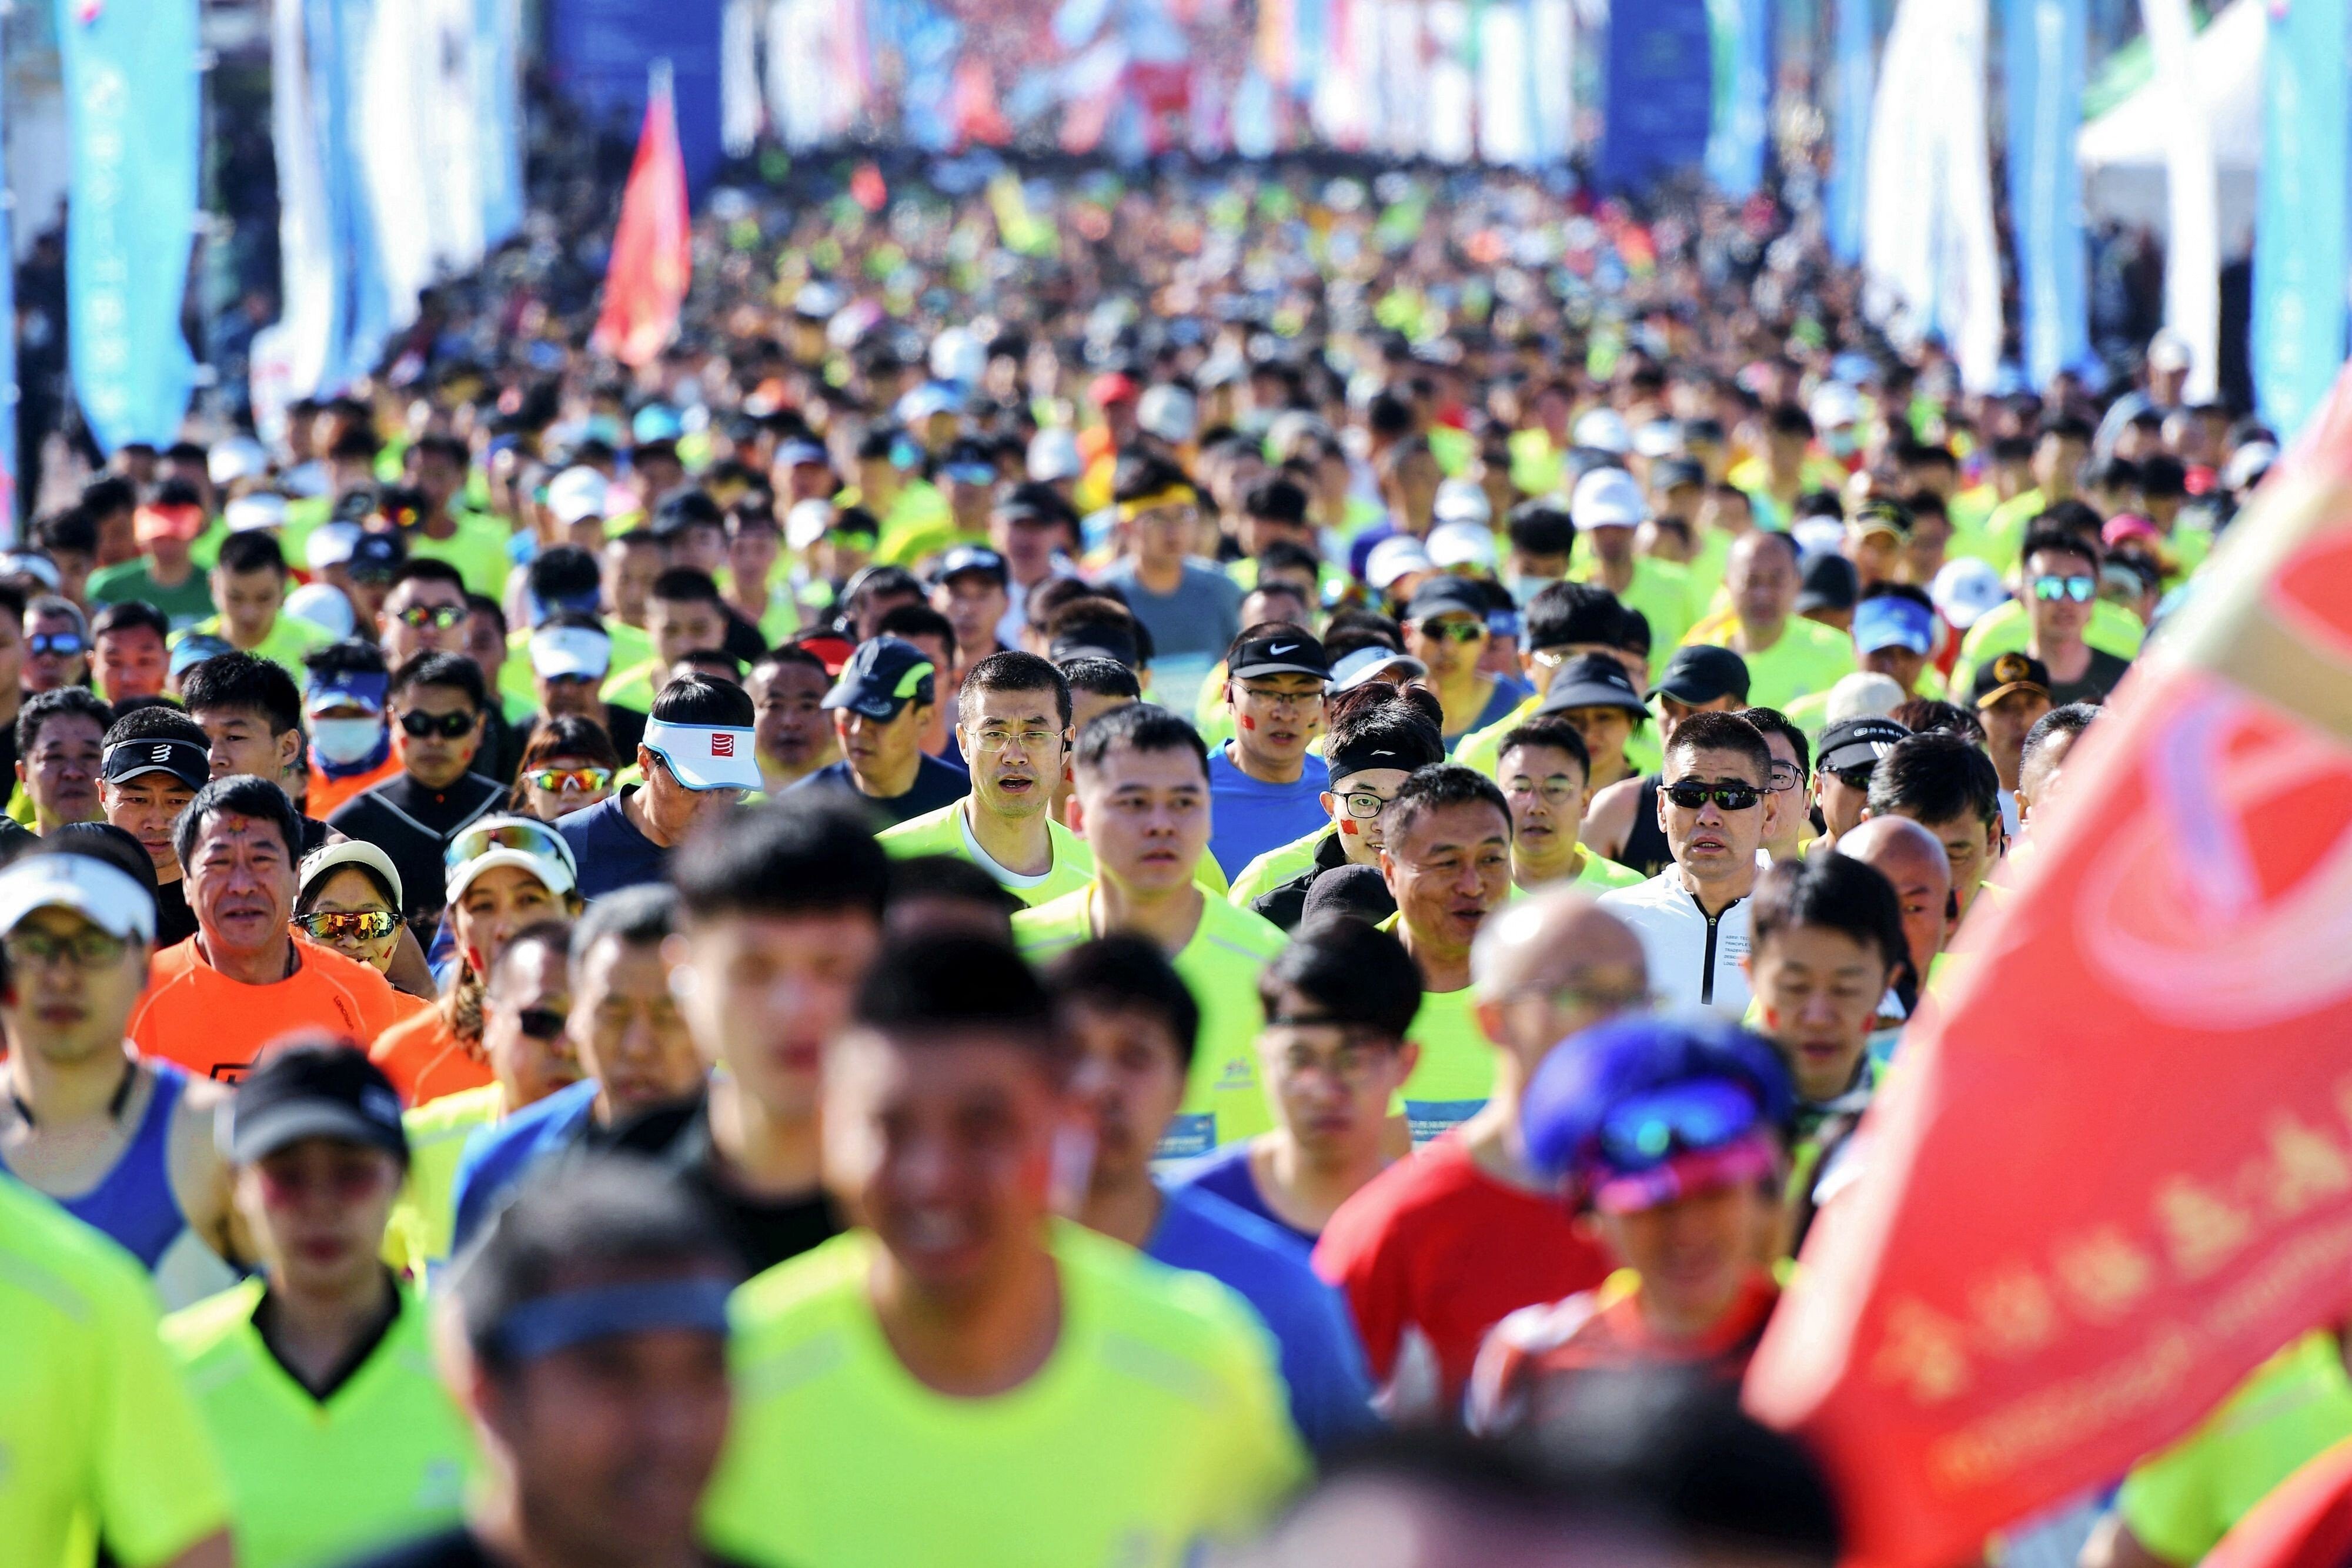 Runners take part in the Qingdao West Coast half marathon in China's eastern Shandong province on April 18. Photo: AFP